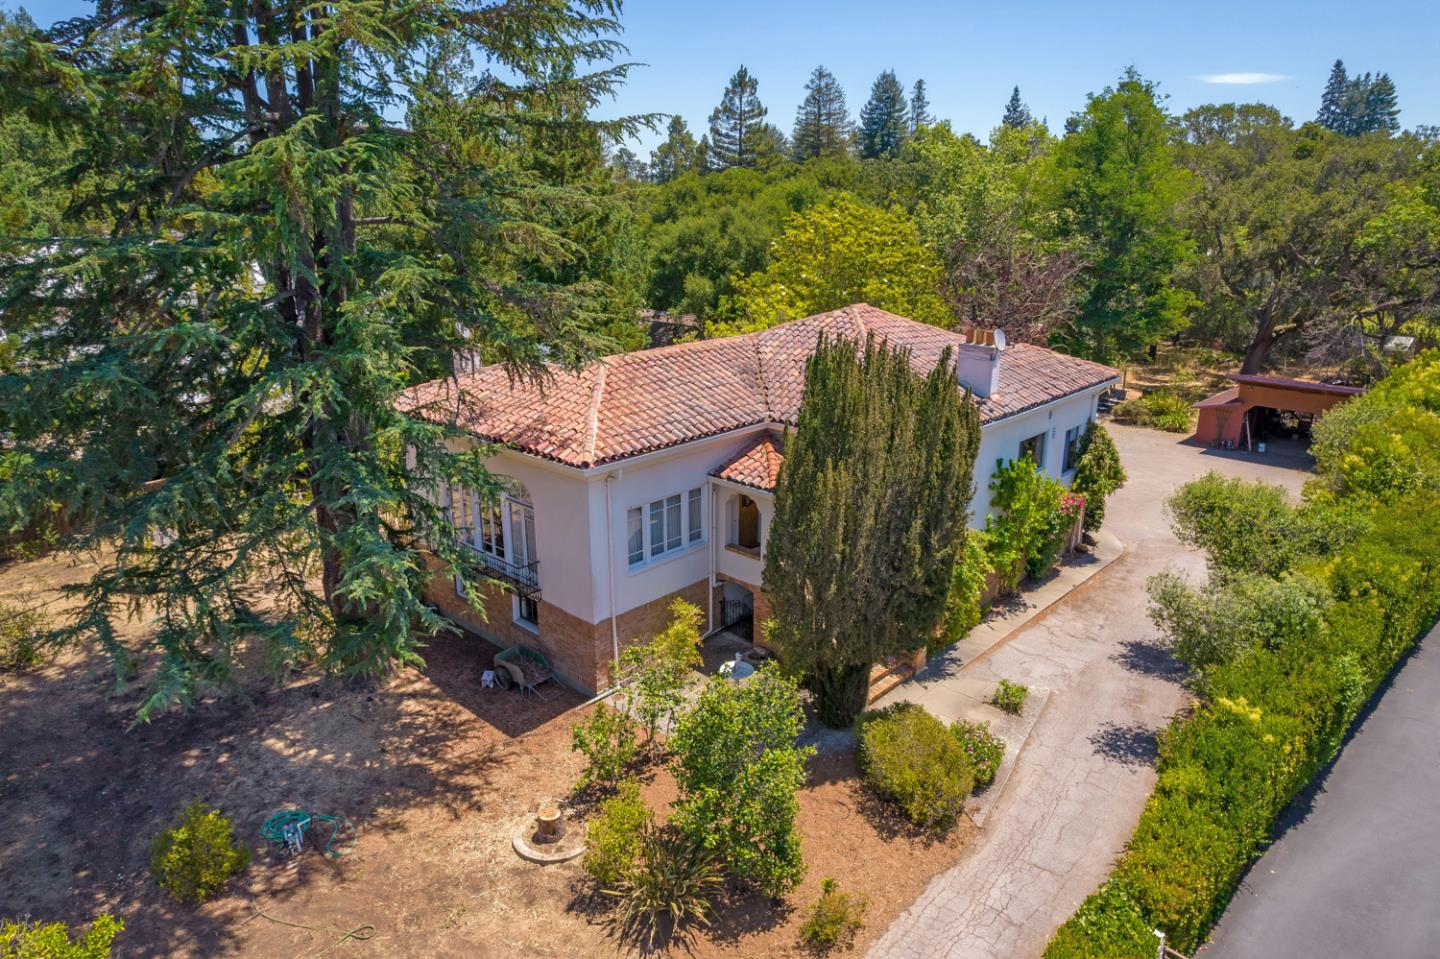 Located on one of West Atherton's most prestigious streets, this one-of-a-kind fine two-story Spanish inspired estate is situated on a large level lot with an established fruit orchard.  Almendral Avenue is one of the few remaining quiet streets in Atherton.   The main residence features 5 spacious bedrooms and 2.5 bathrooms with intricate details throughout. Beyond the main home lies a separate 1 bed/1 bath cottage with a kitchen, perfect for extended family, guests or additional office space.  167 Almendral Avenue is secluded yet conveniently located just minutes away from The Circus Club, Stanford University, renowned private schools, Sand Hill Road, and some of the most successful high-tech companies (Facebook, Google, and Apple). Atherton's mid-peninsula location is also centrally located between San Francisco and San Jose International Airports.  Because of its privacy, beauty, and location, this represents a rare opportunity to own one of the finest properties in Atherton.